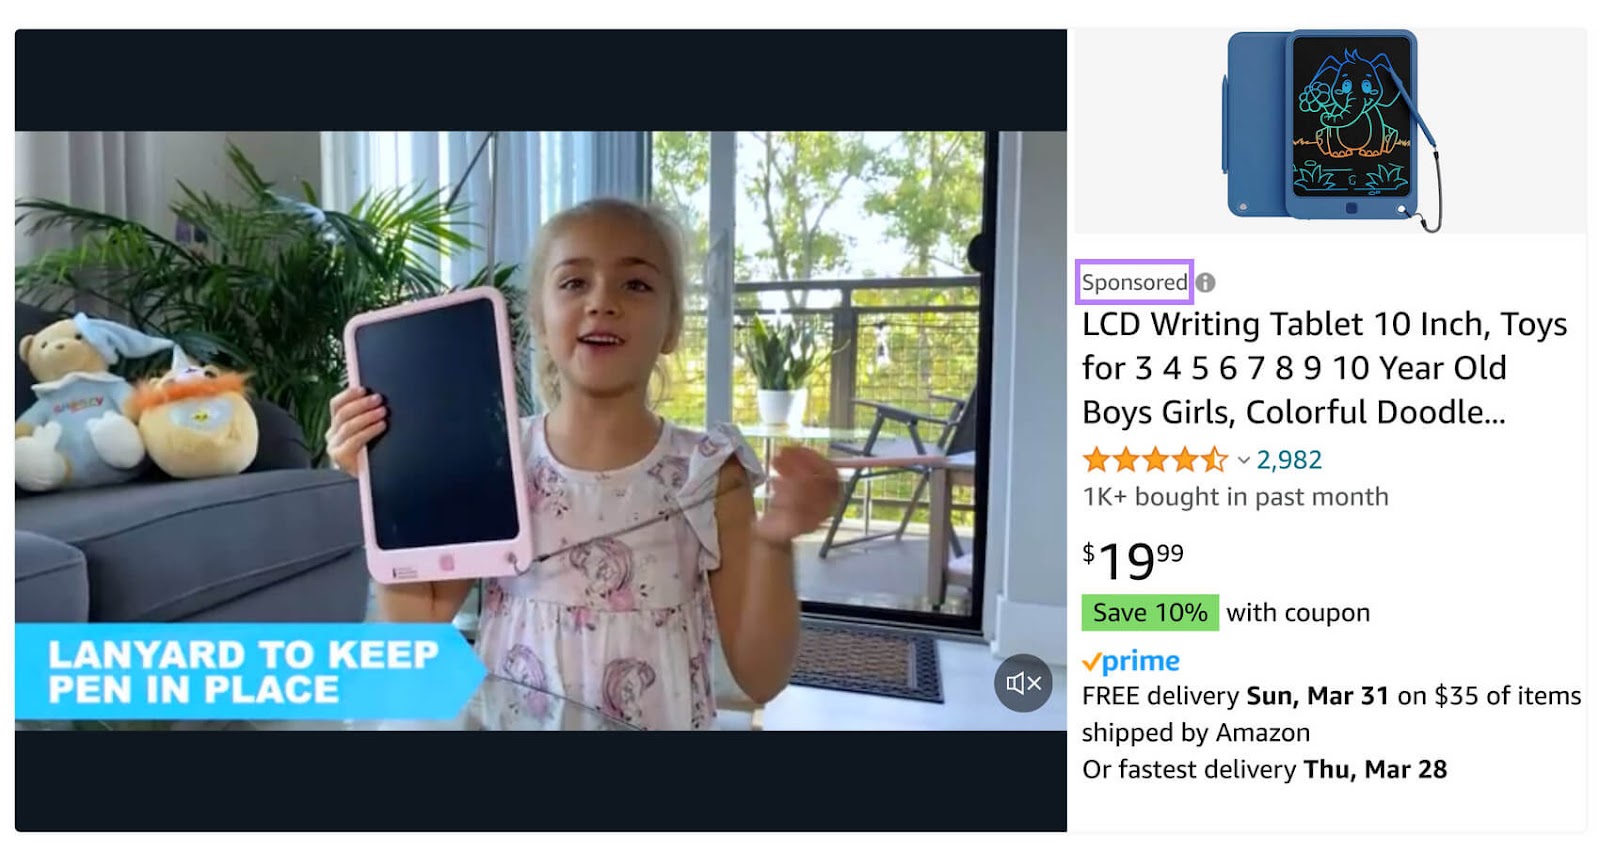 A sponsored product ad for a writing tablet on Amazon